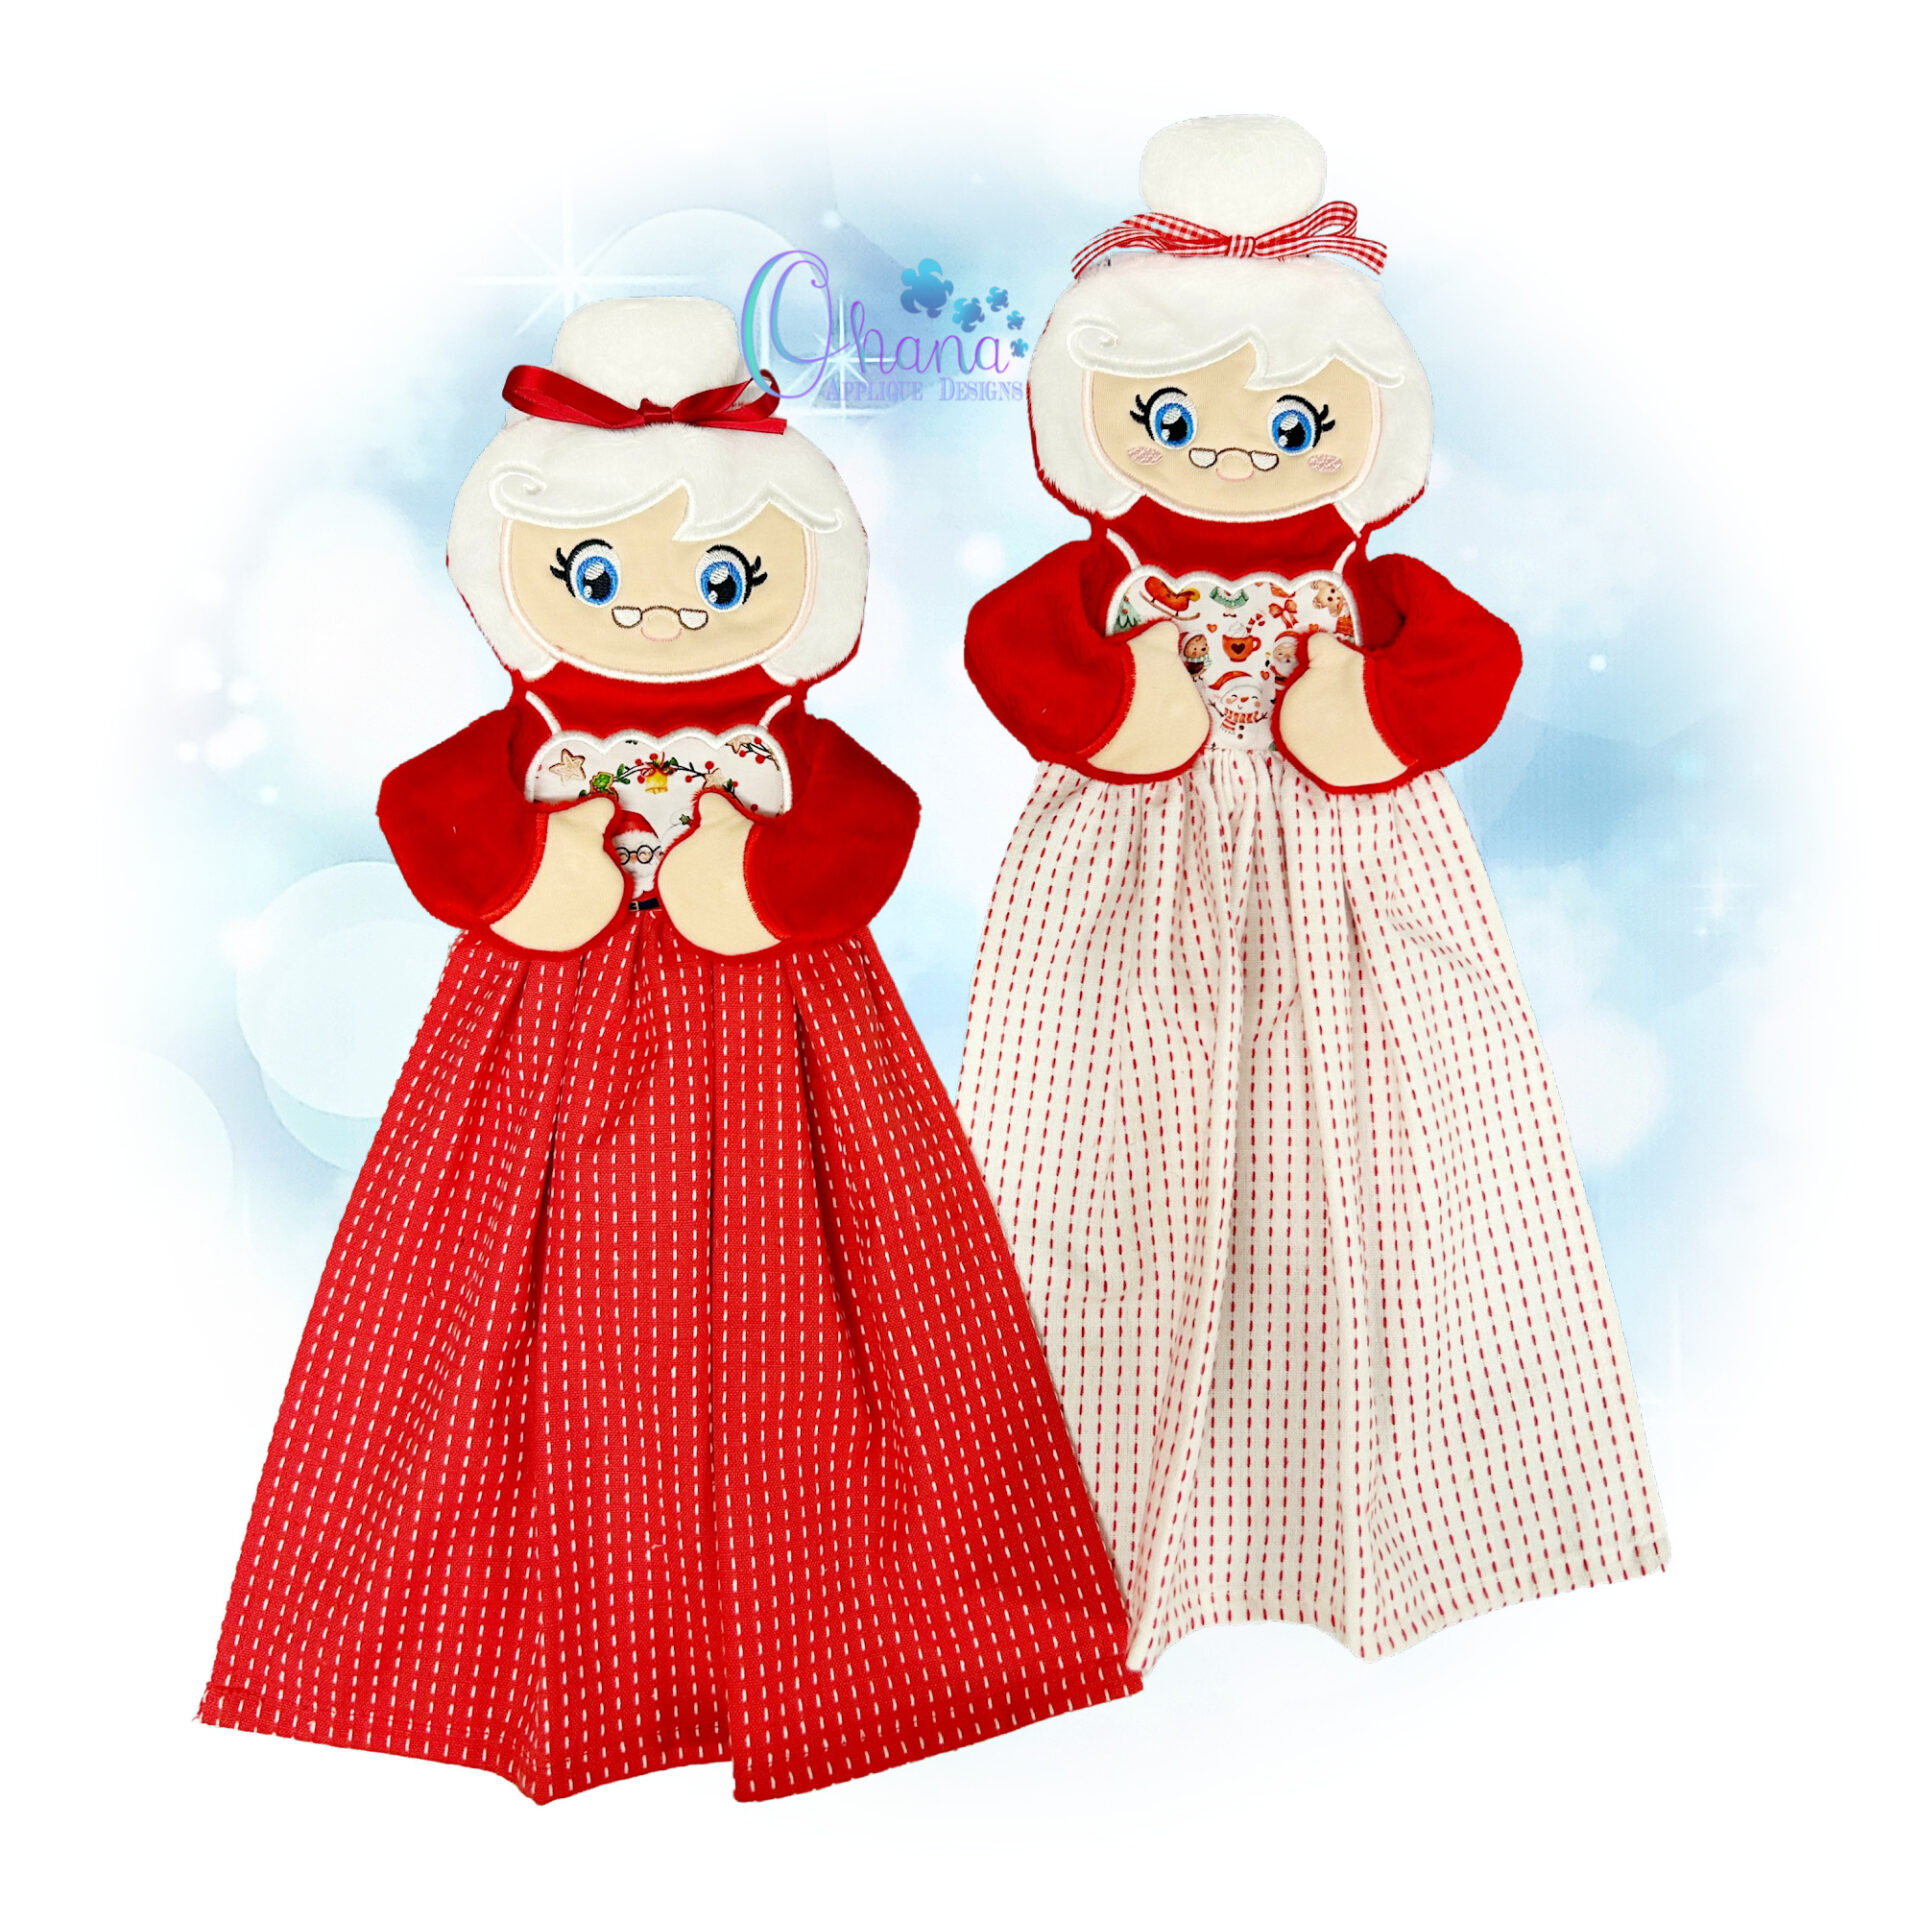 OAD Mrs Claus HTH 2000 copy